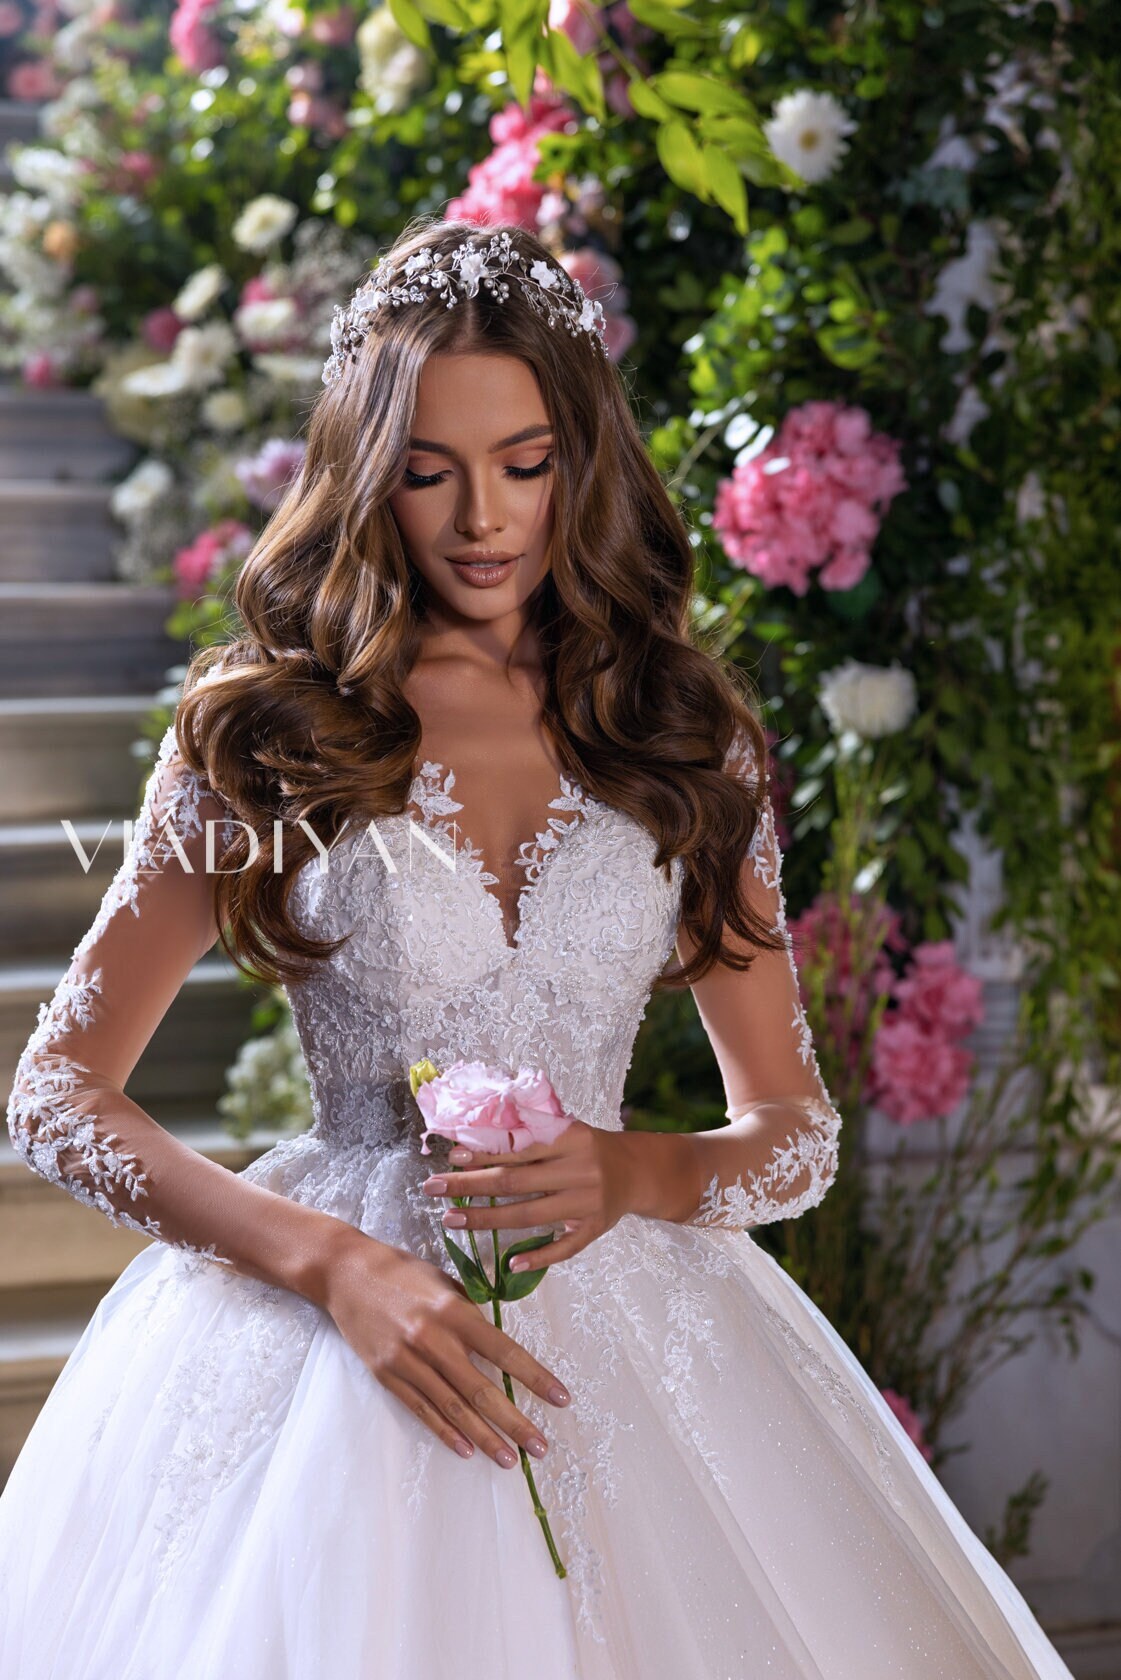 Charming Luxury Princess Queen Long Sleeve Wedding Dress Bridal Gown Ball Gown Airy Sparkling Skirt Floral Lace Bodice Unforgettable